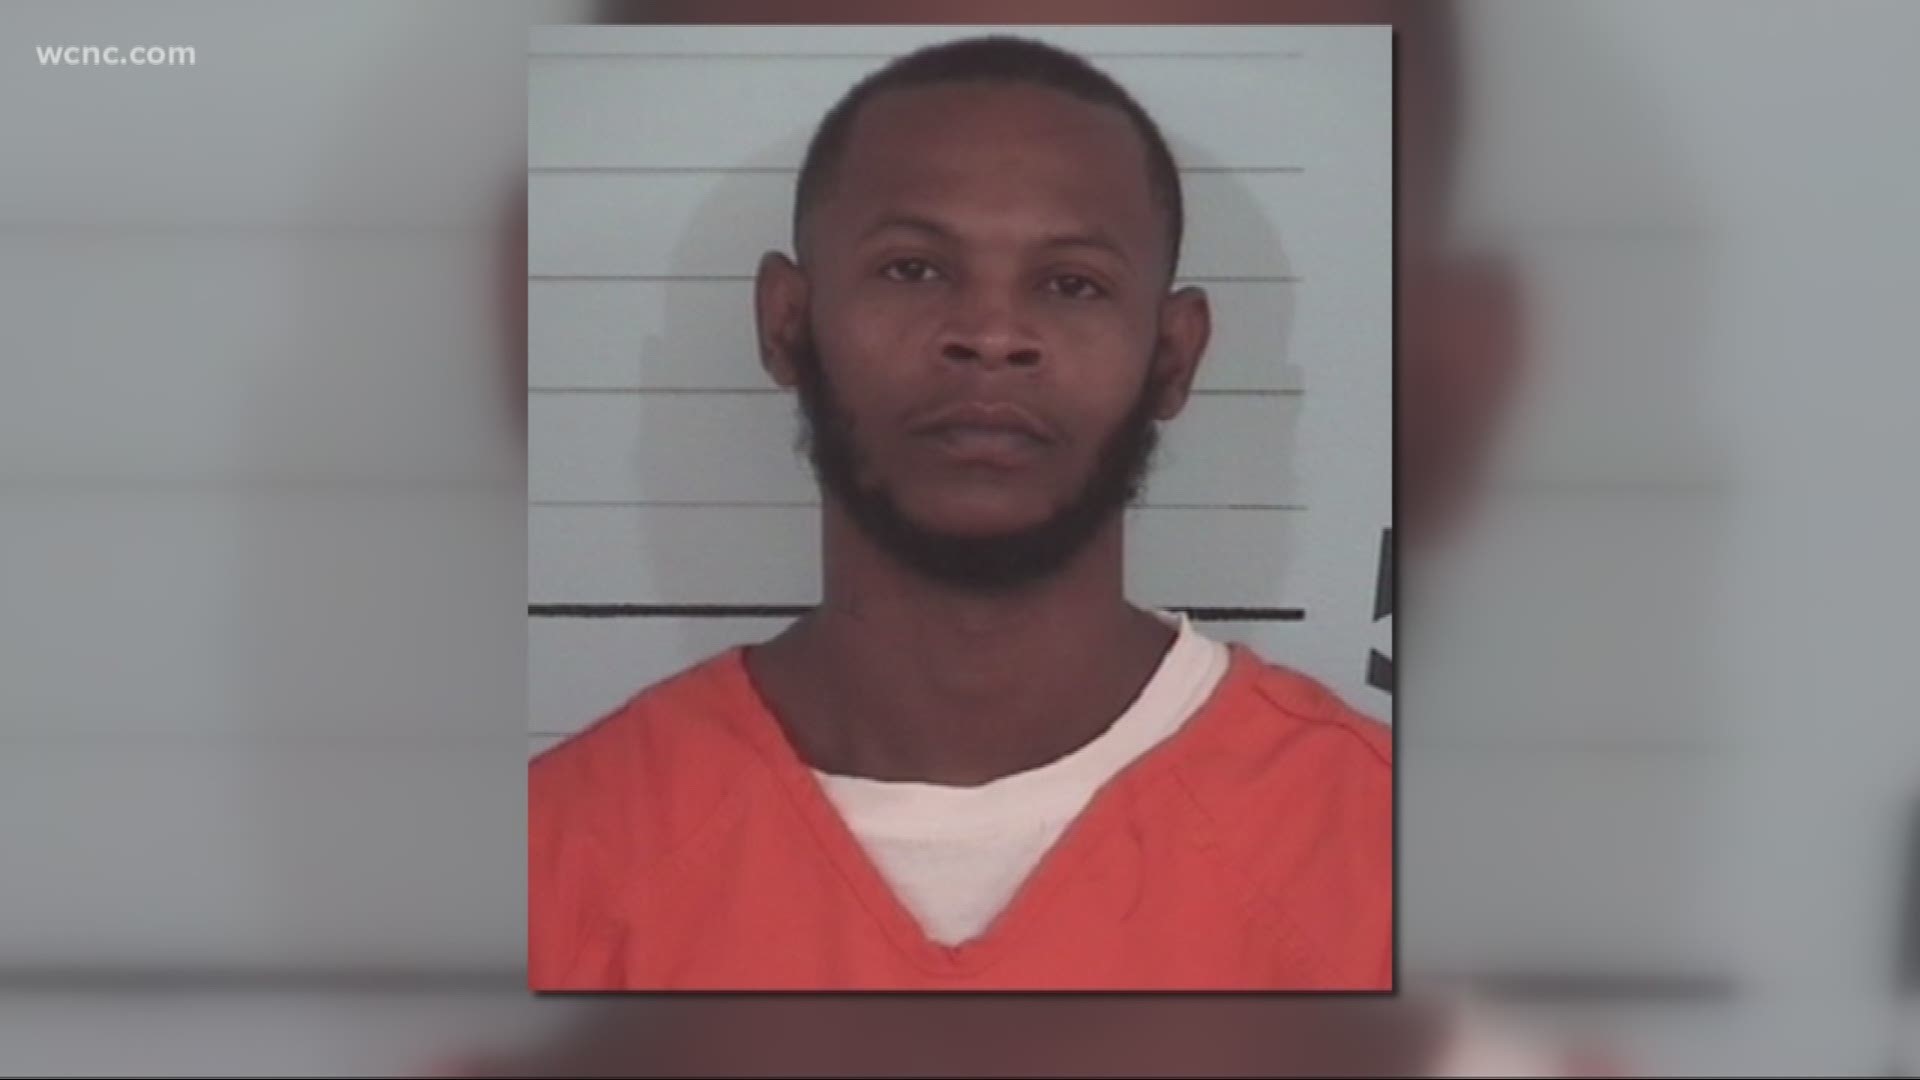 Police say after the shooting, a man turned himself in. He's due in court Monday.